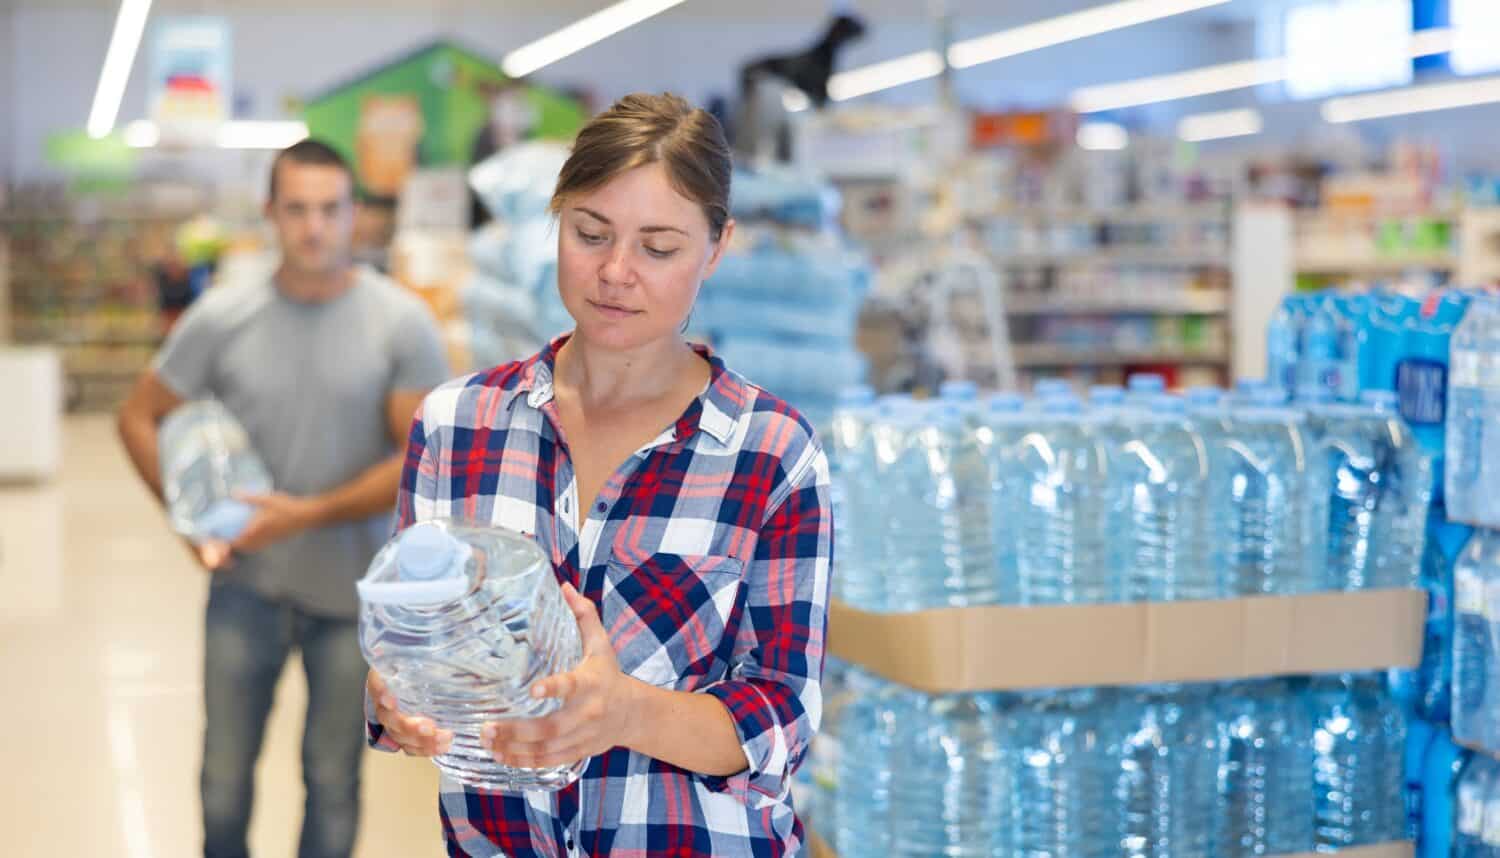 Interested young woman choosing bottled still water in supermarket, reading label on plastic bottle..